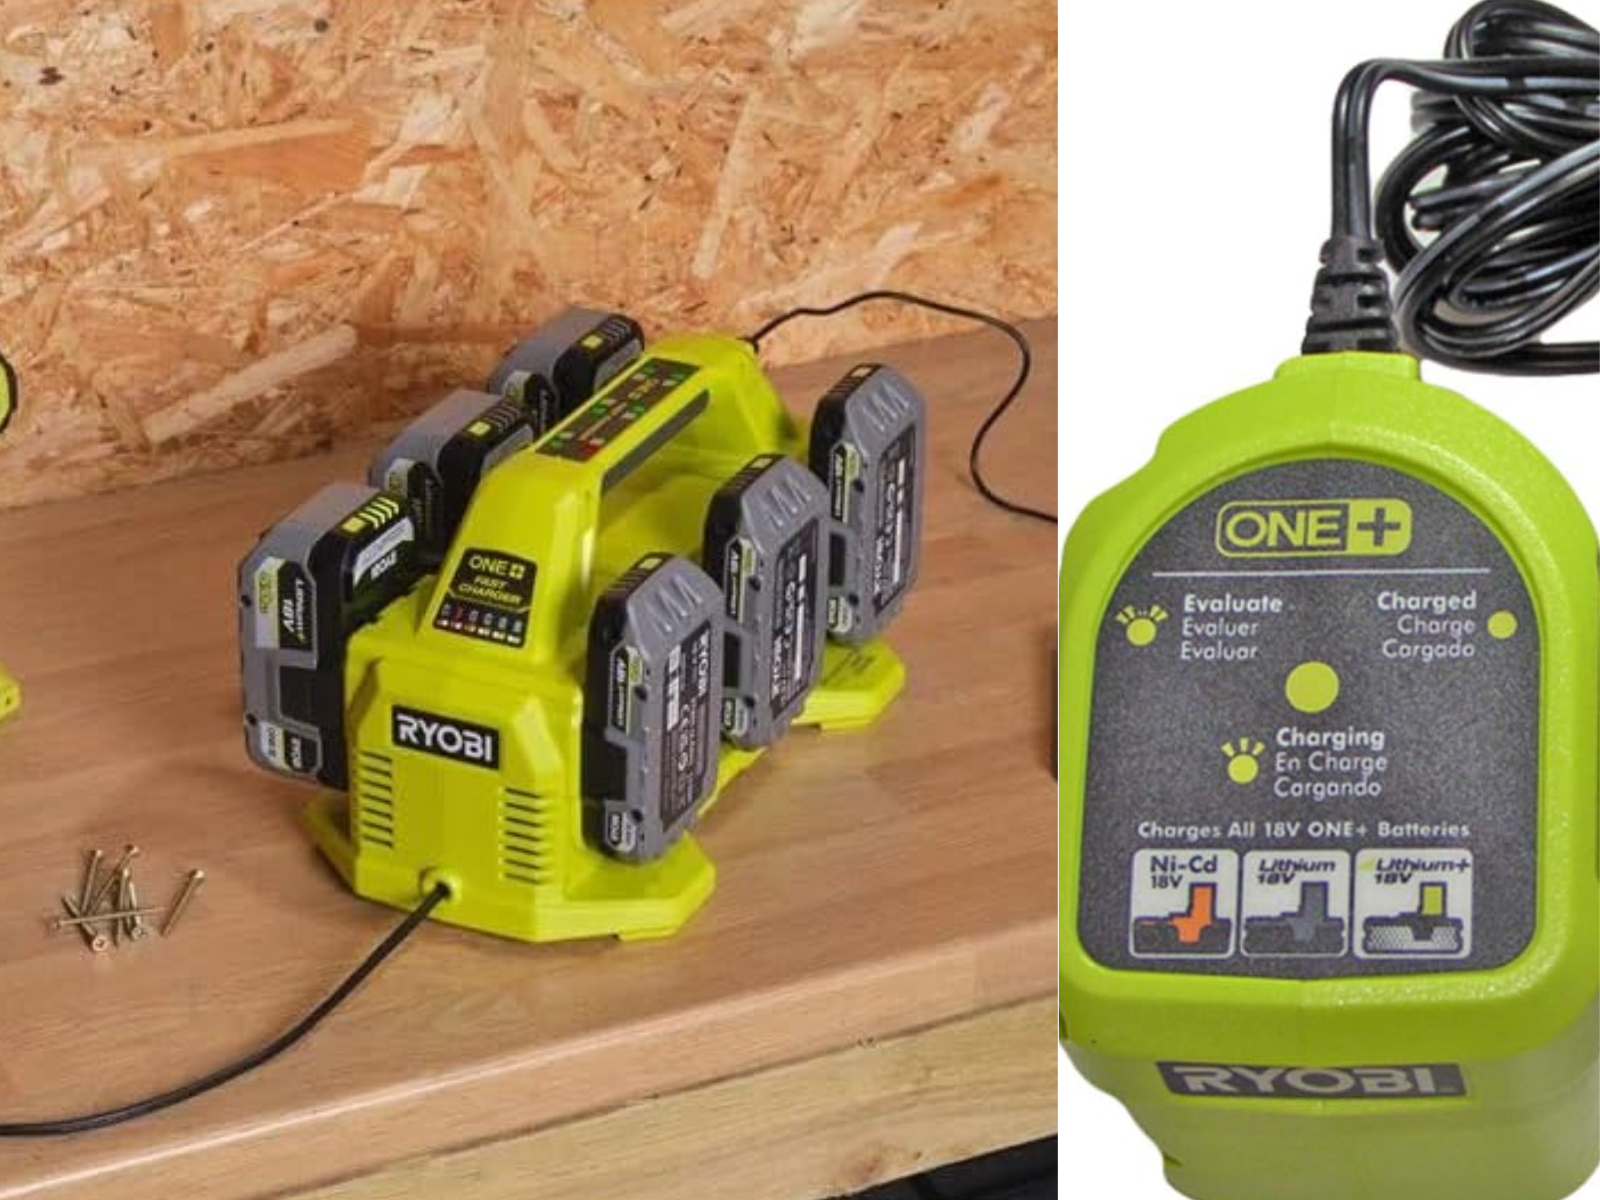 A Ryobi charger with 6 batteries charging, and a ONE+ charger up close photo.